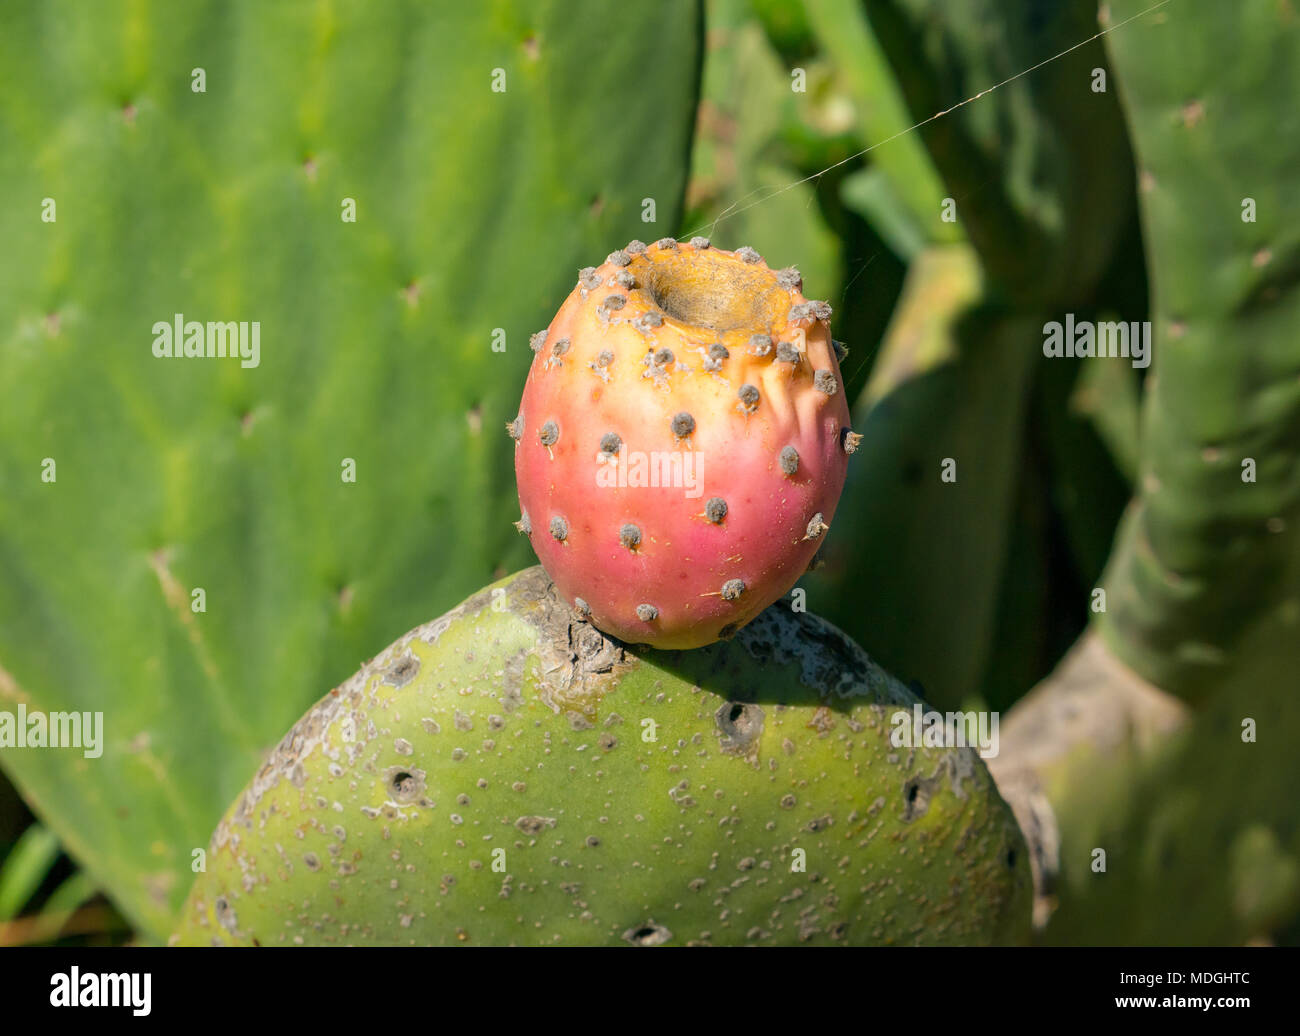 Close up of sunlit prickly pear cactus fruit, Opuntia, growing in Santa Cruz, Colchagua Valley, Chile, South America Stock Photo